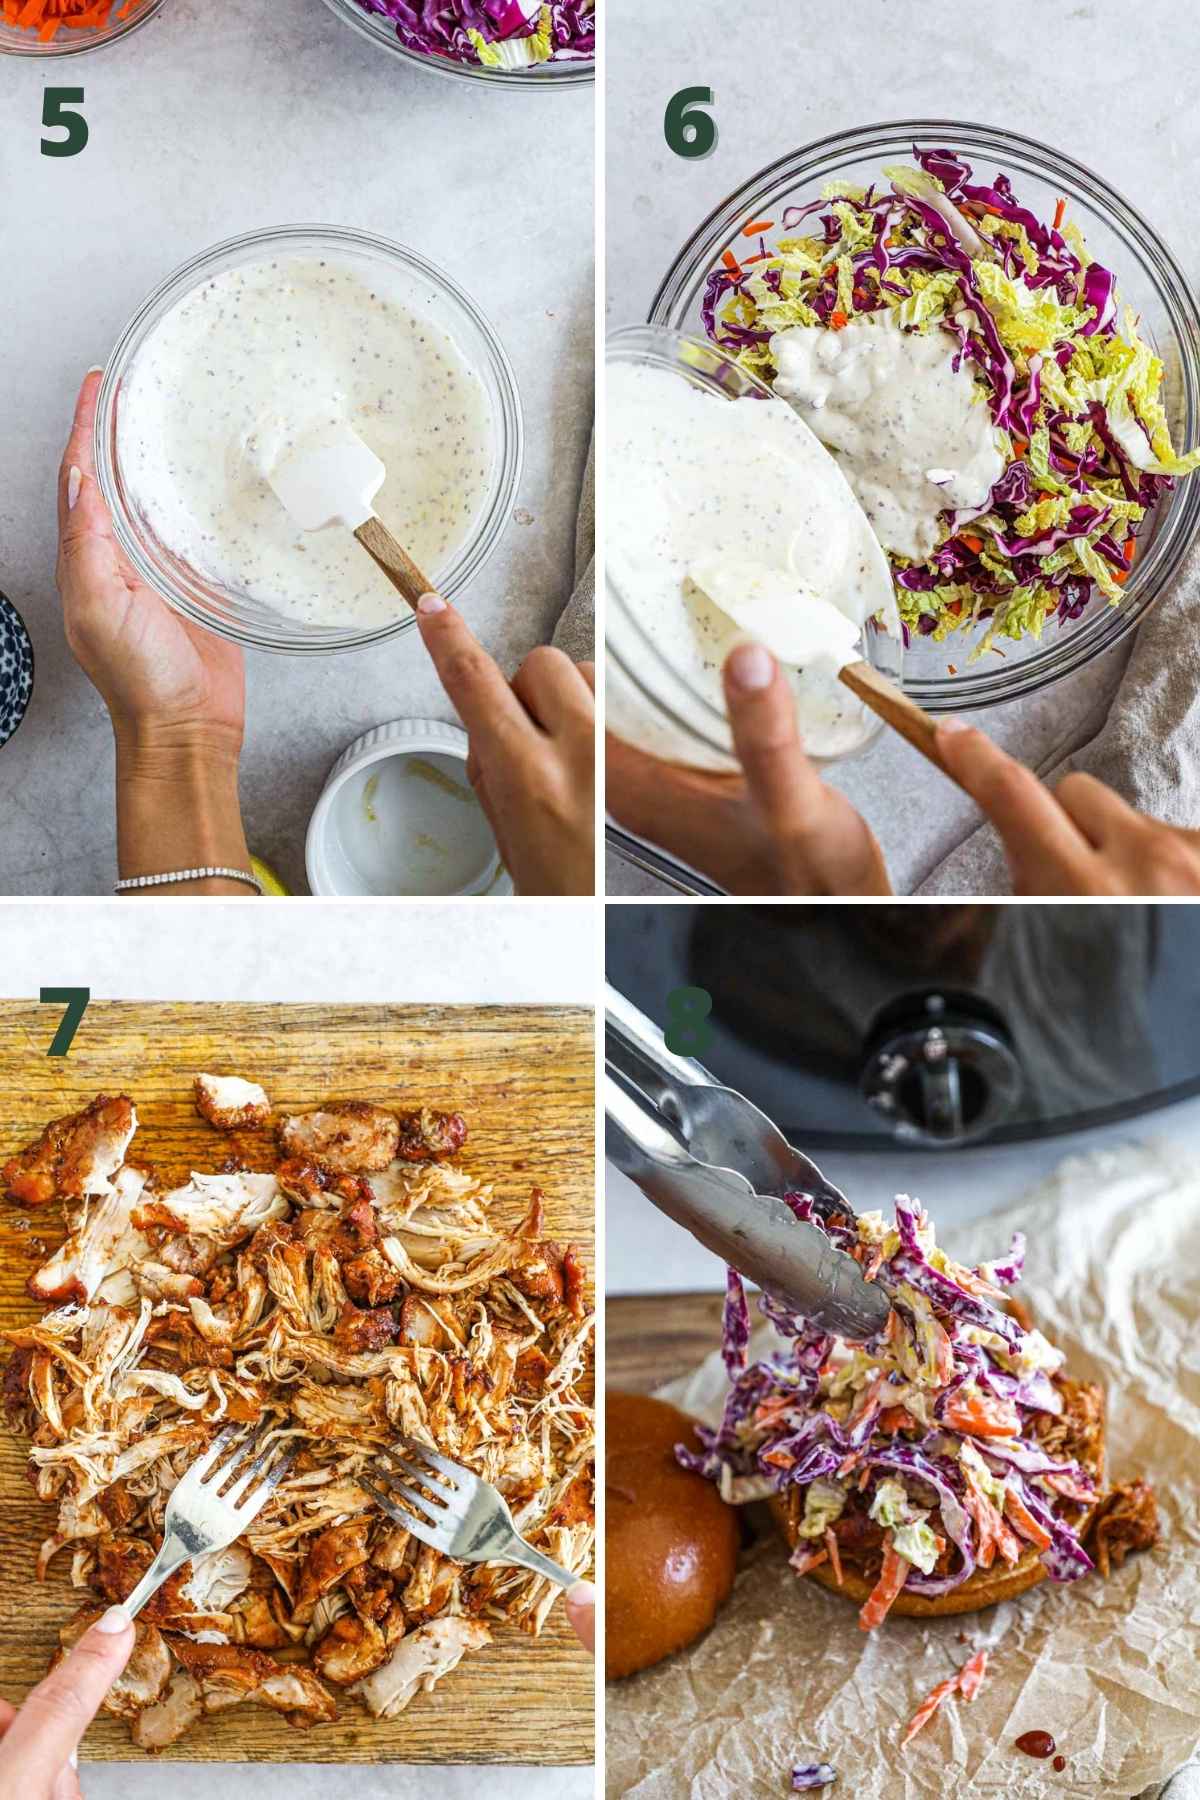 Steps to make homemade coleslaw, pulled bbq chicken thighs, and assemble the chicken sandwich, burger, or sliders.